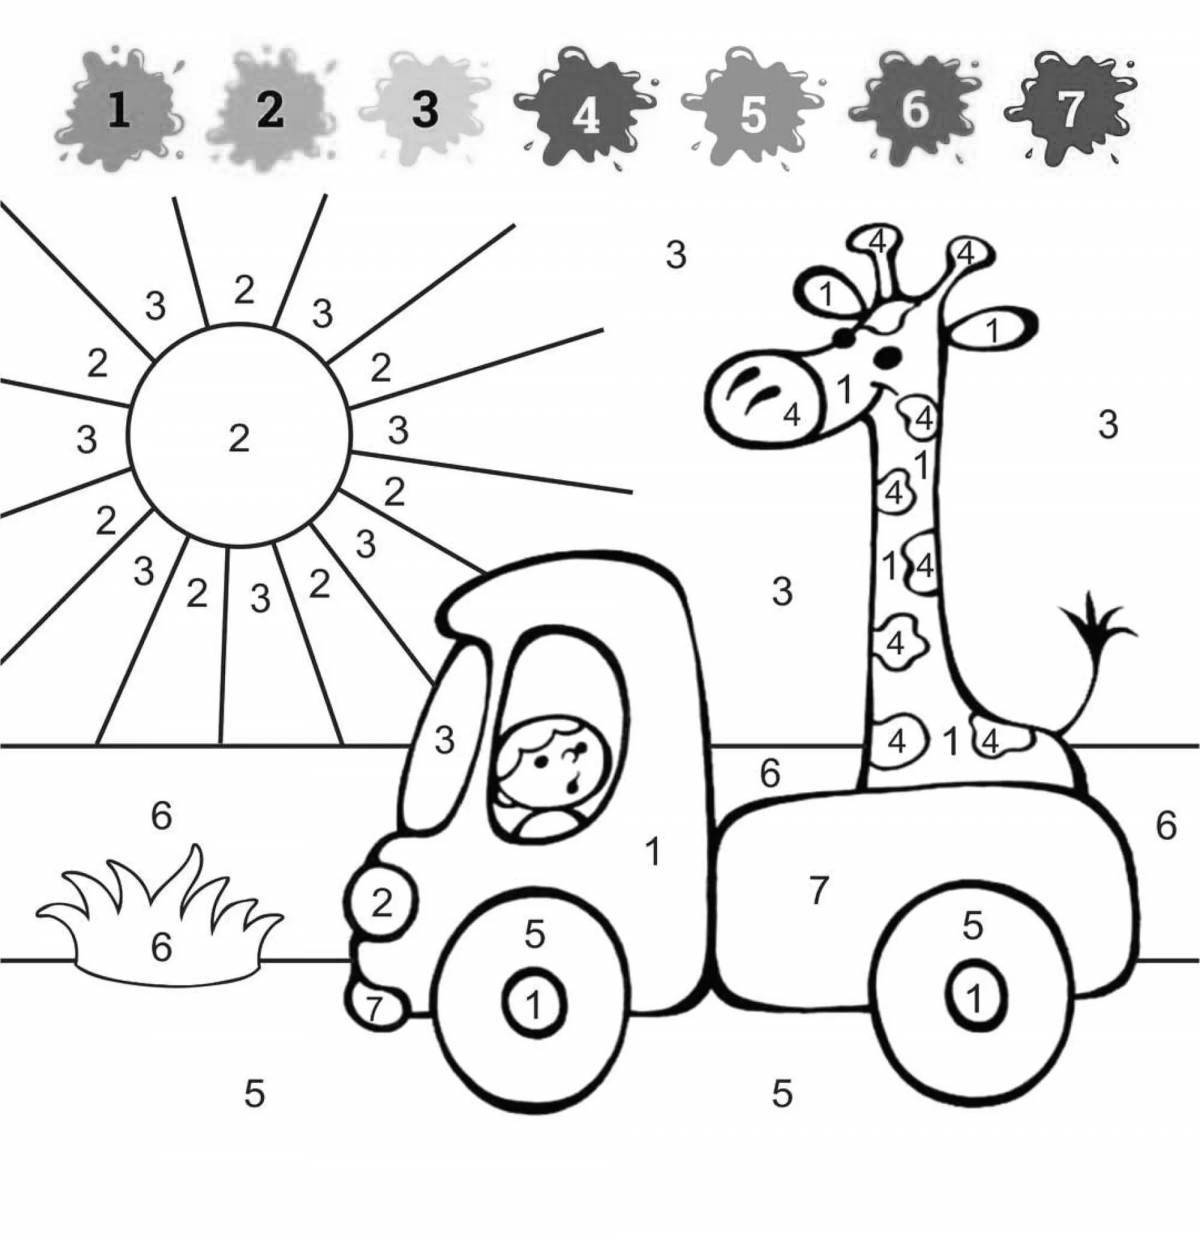 A playful math coloring book for 6-7 year olds